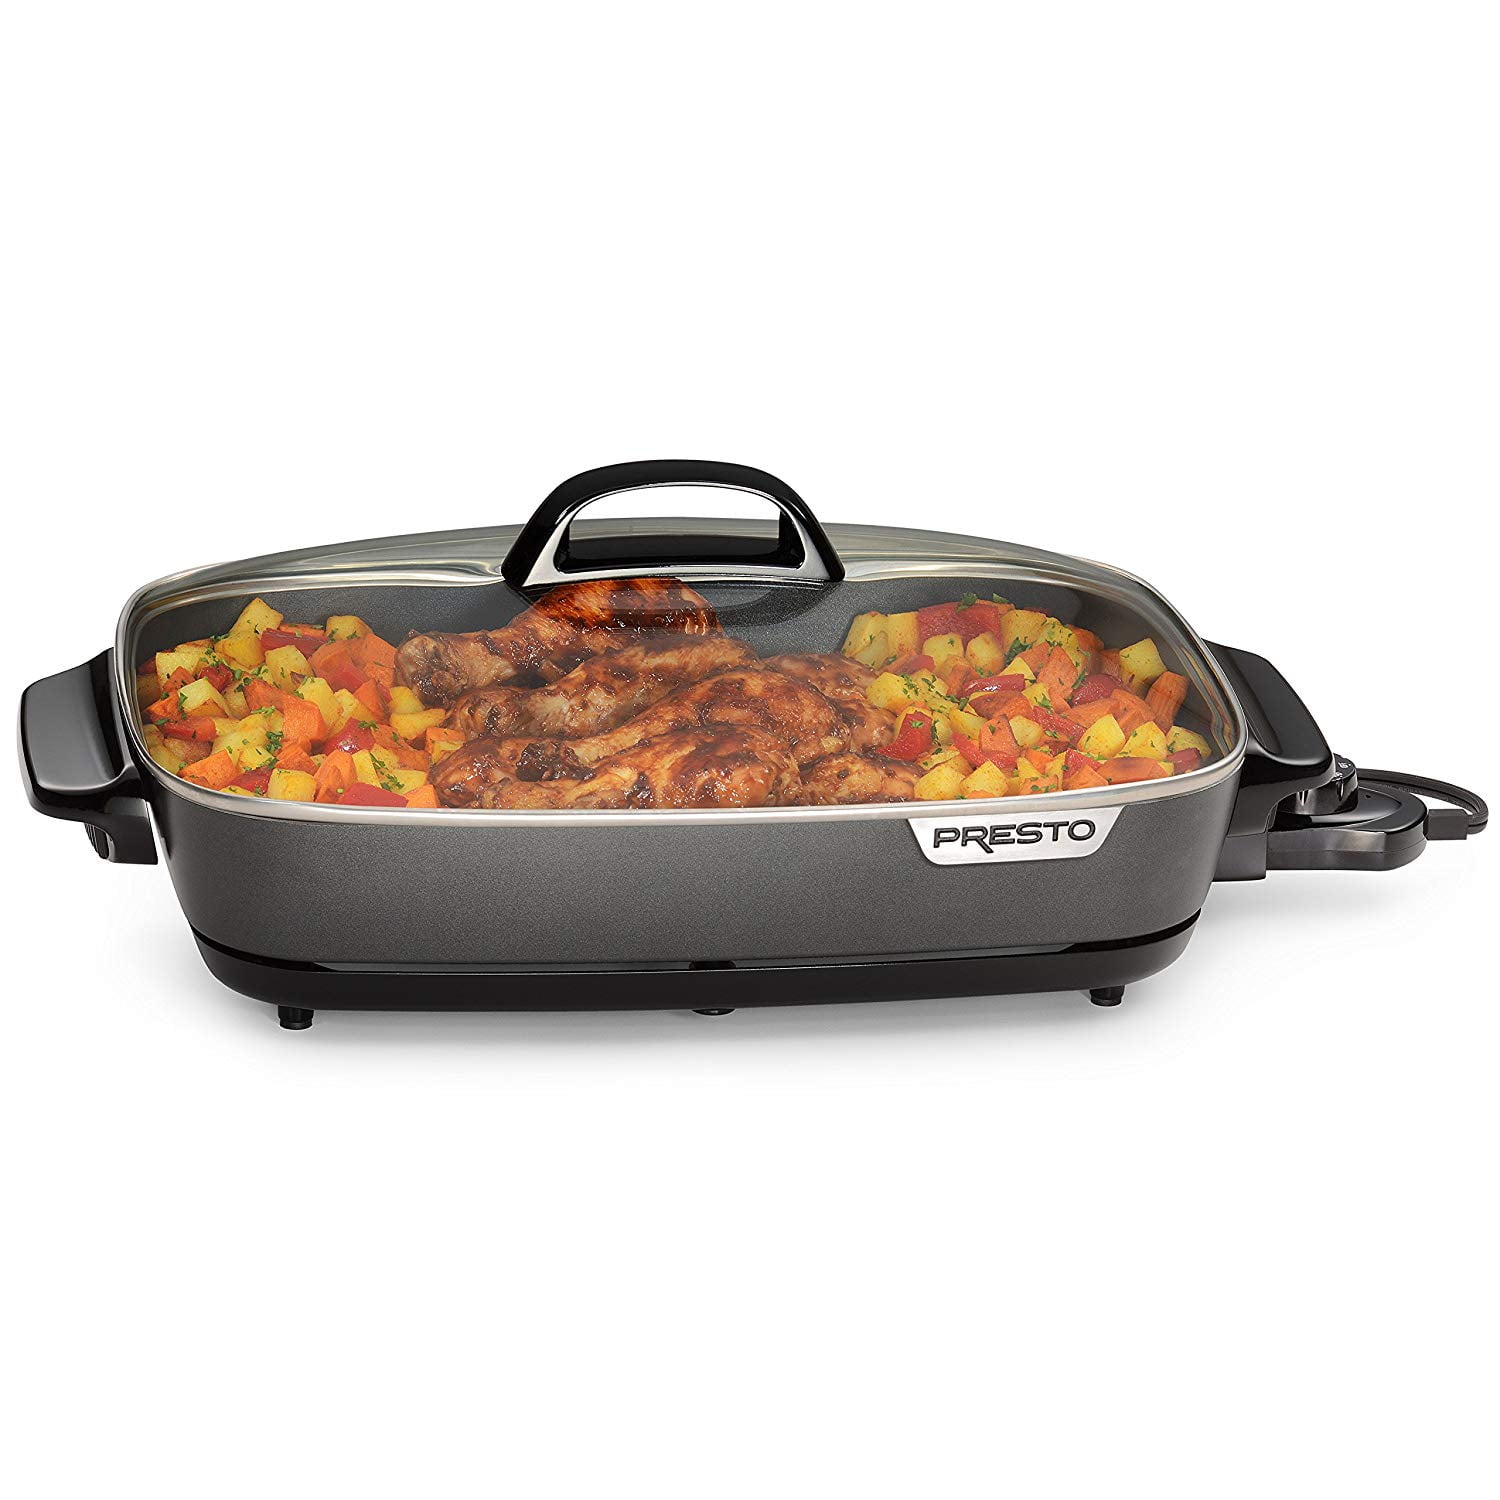 Presto 06852 Jumbo Size Electric Skillet with Glass Lid, 16